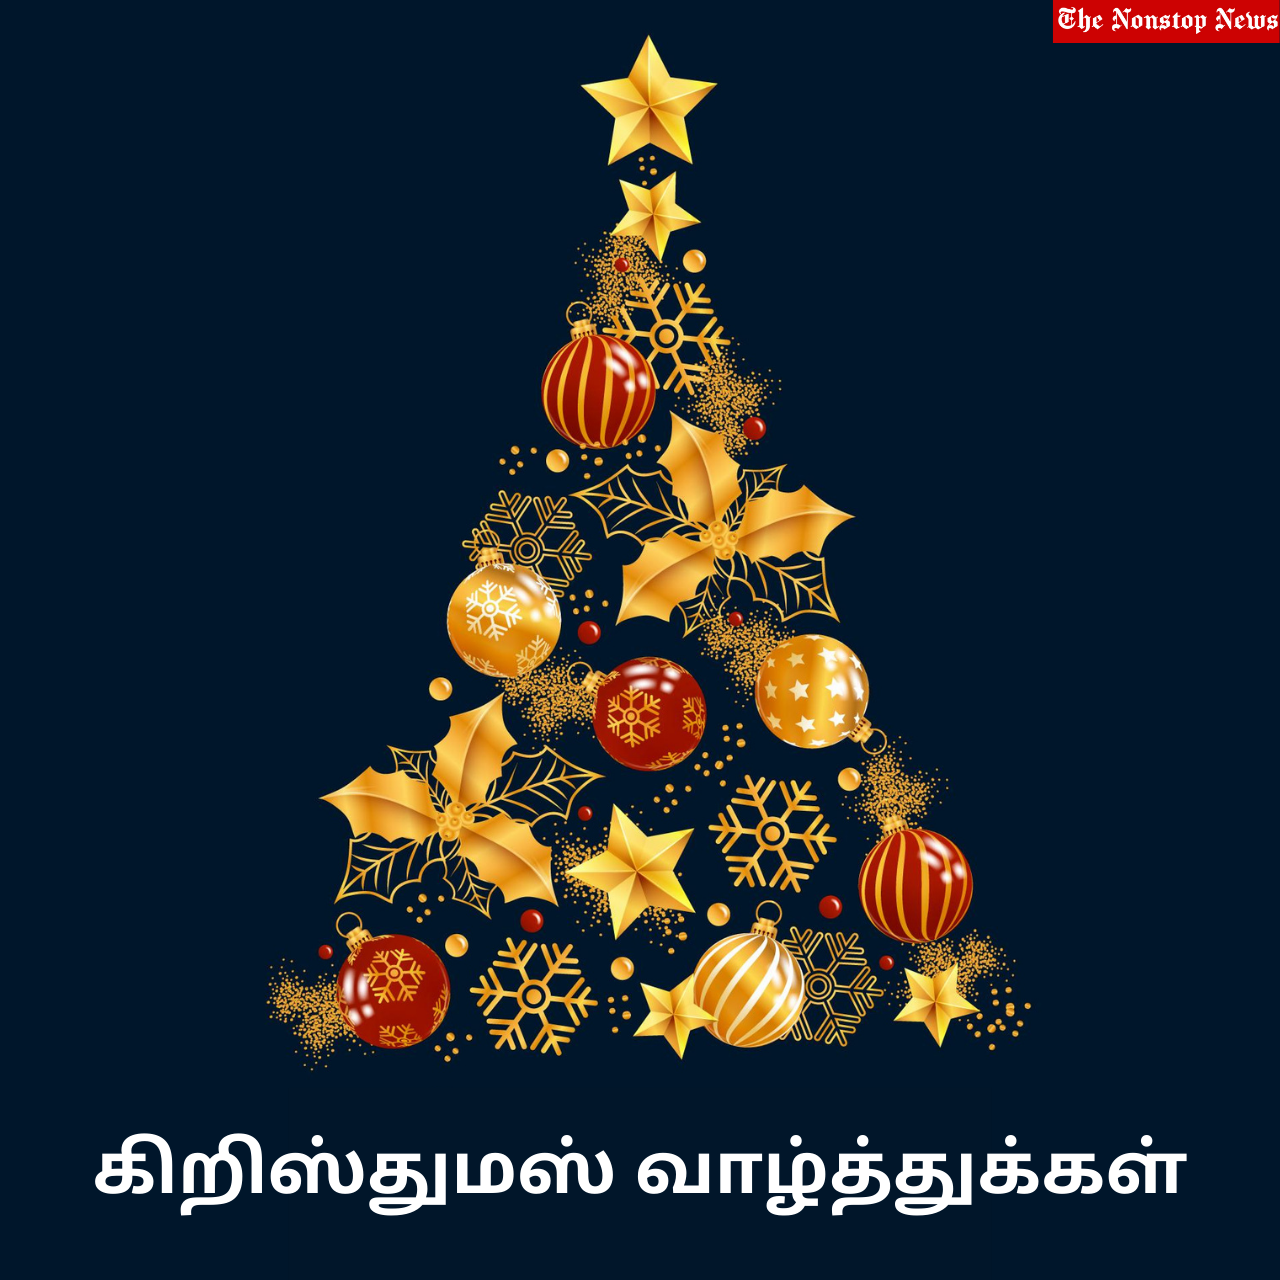 Happy Christmas 2021: Tamil Wishes, Greetings, Messages, Quotes, Images, and Poster to share